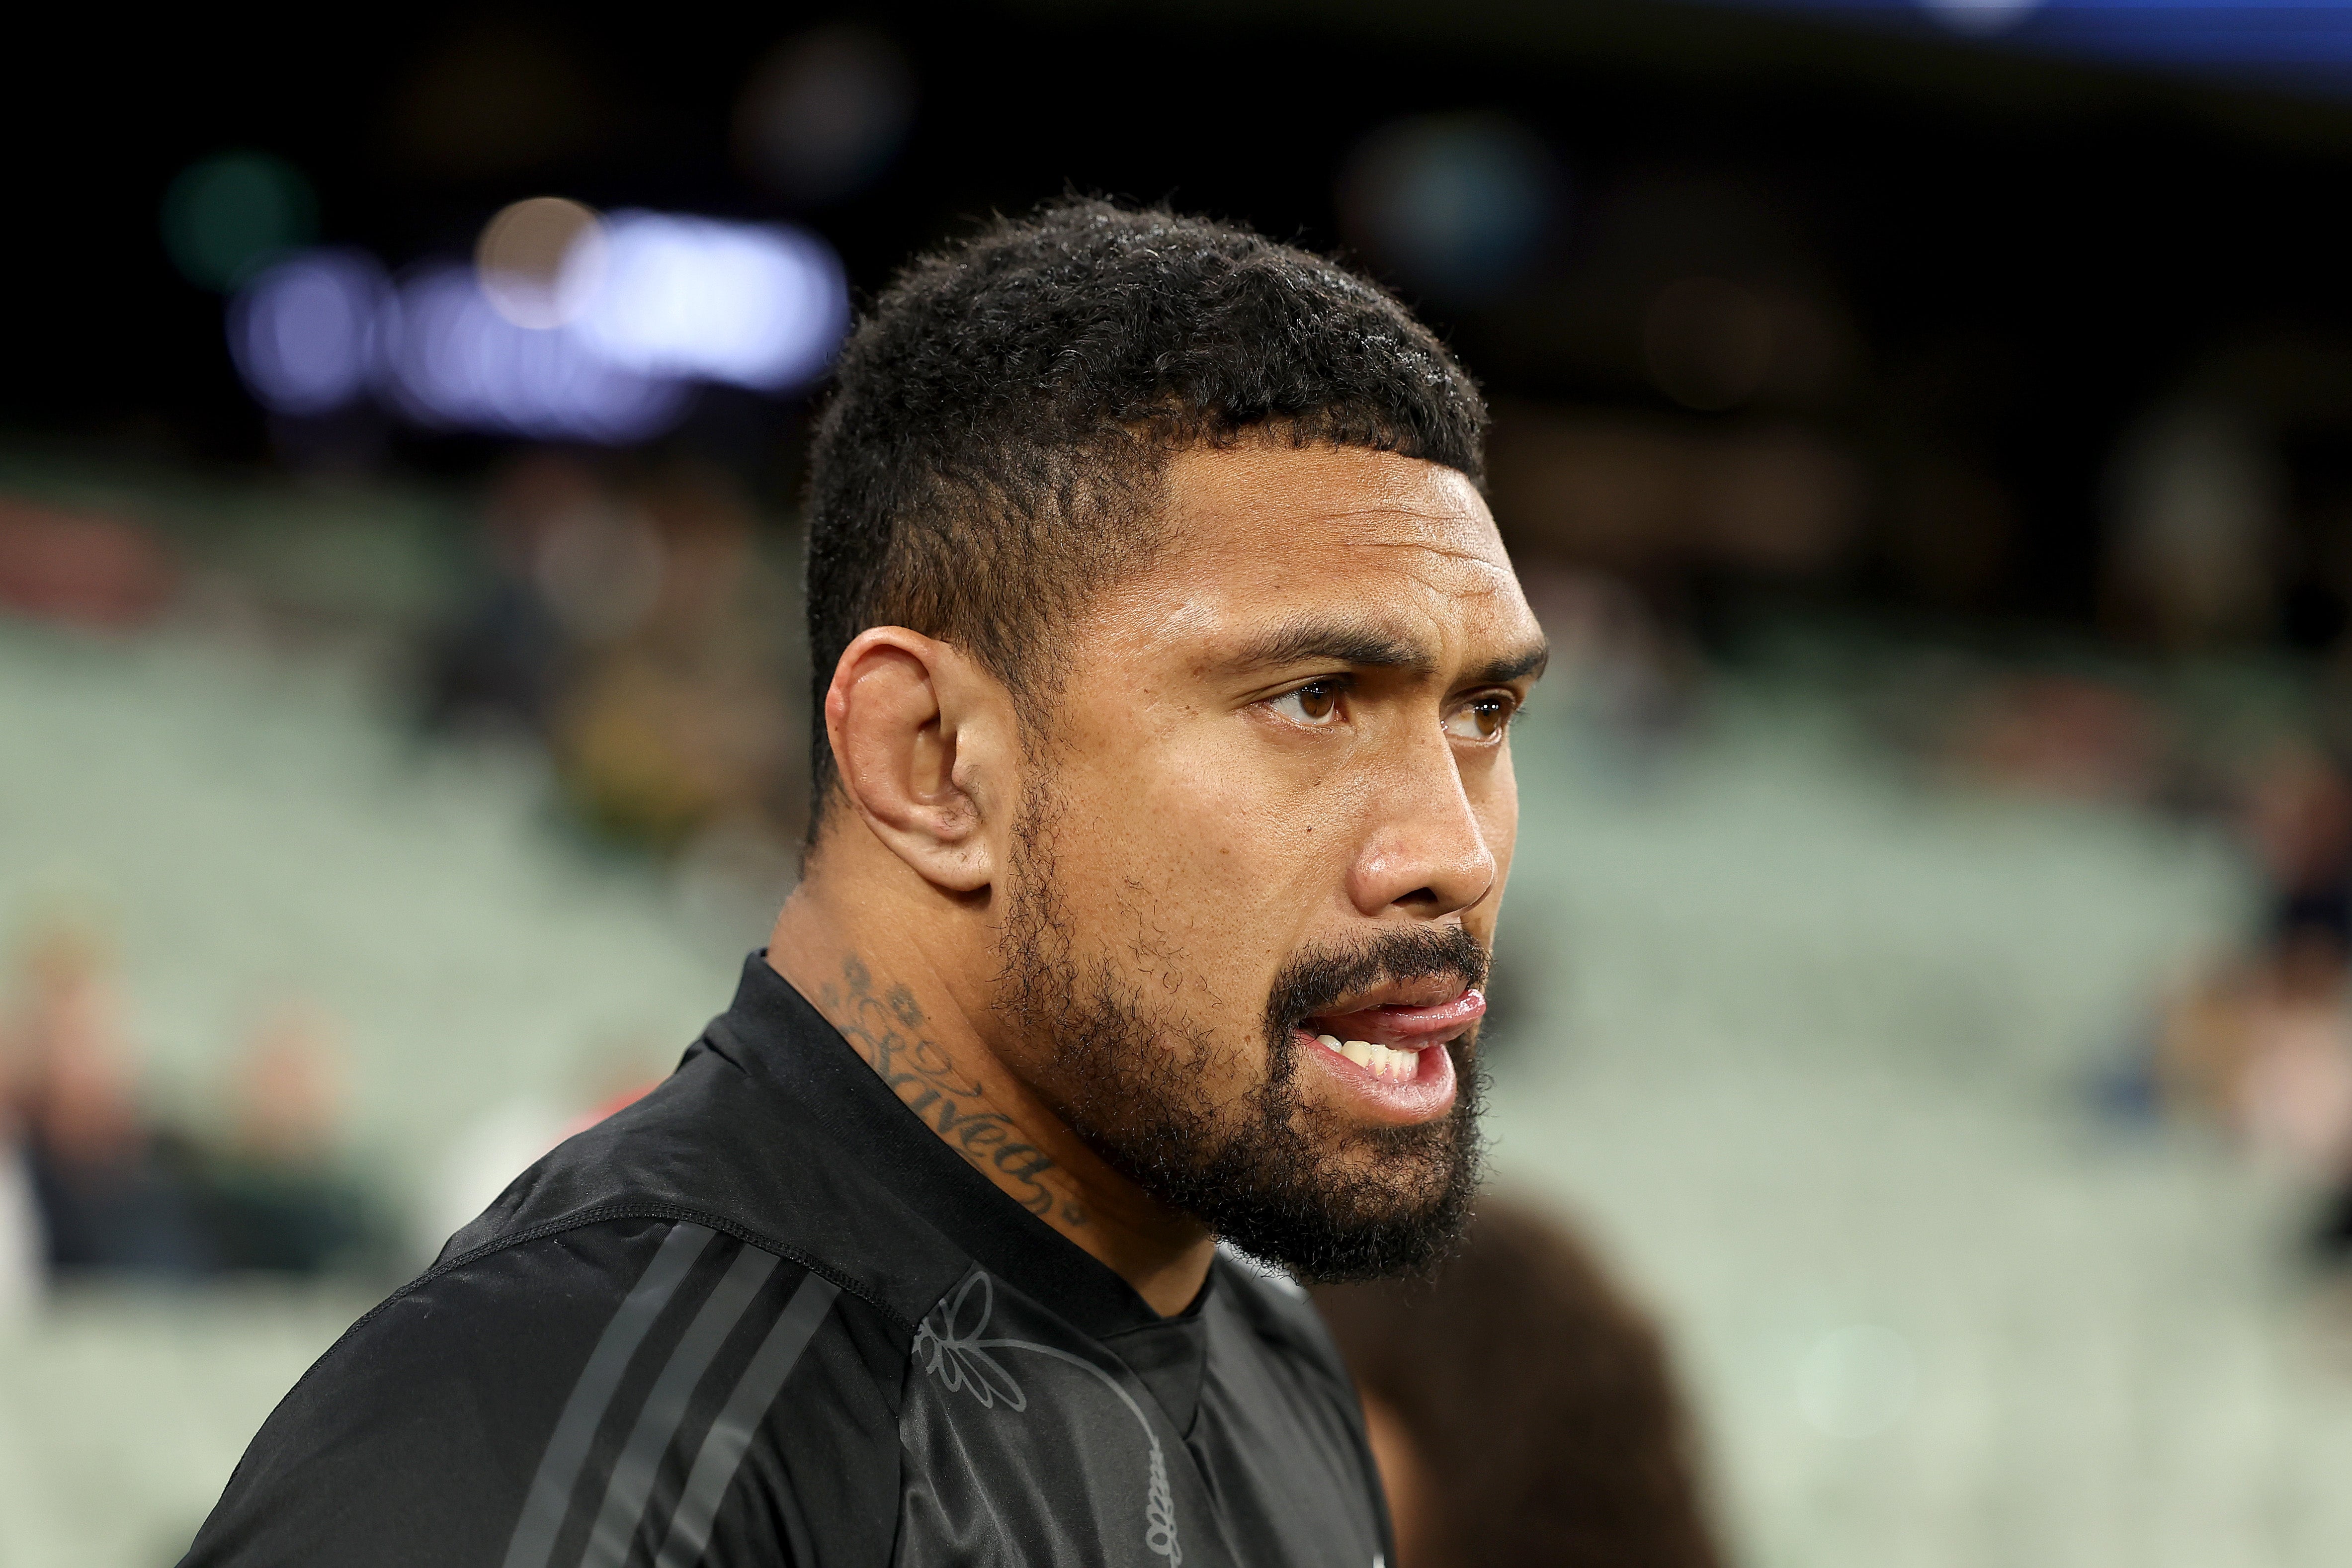 Savea is part of the New Zealand side looking to win their fourth Rugby World Cup